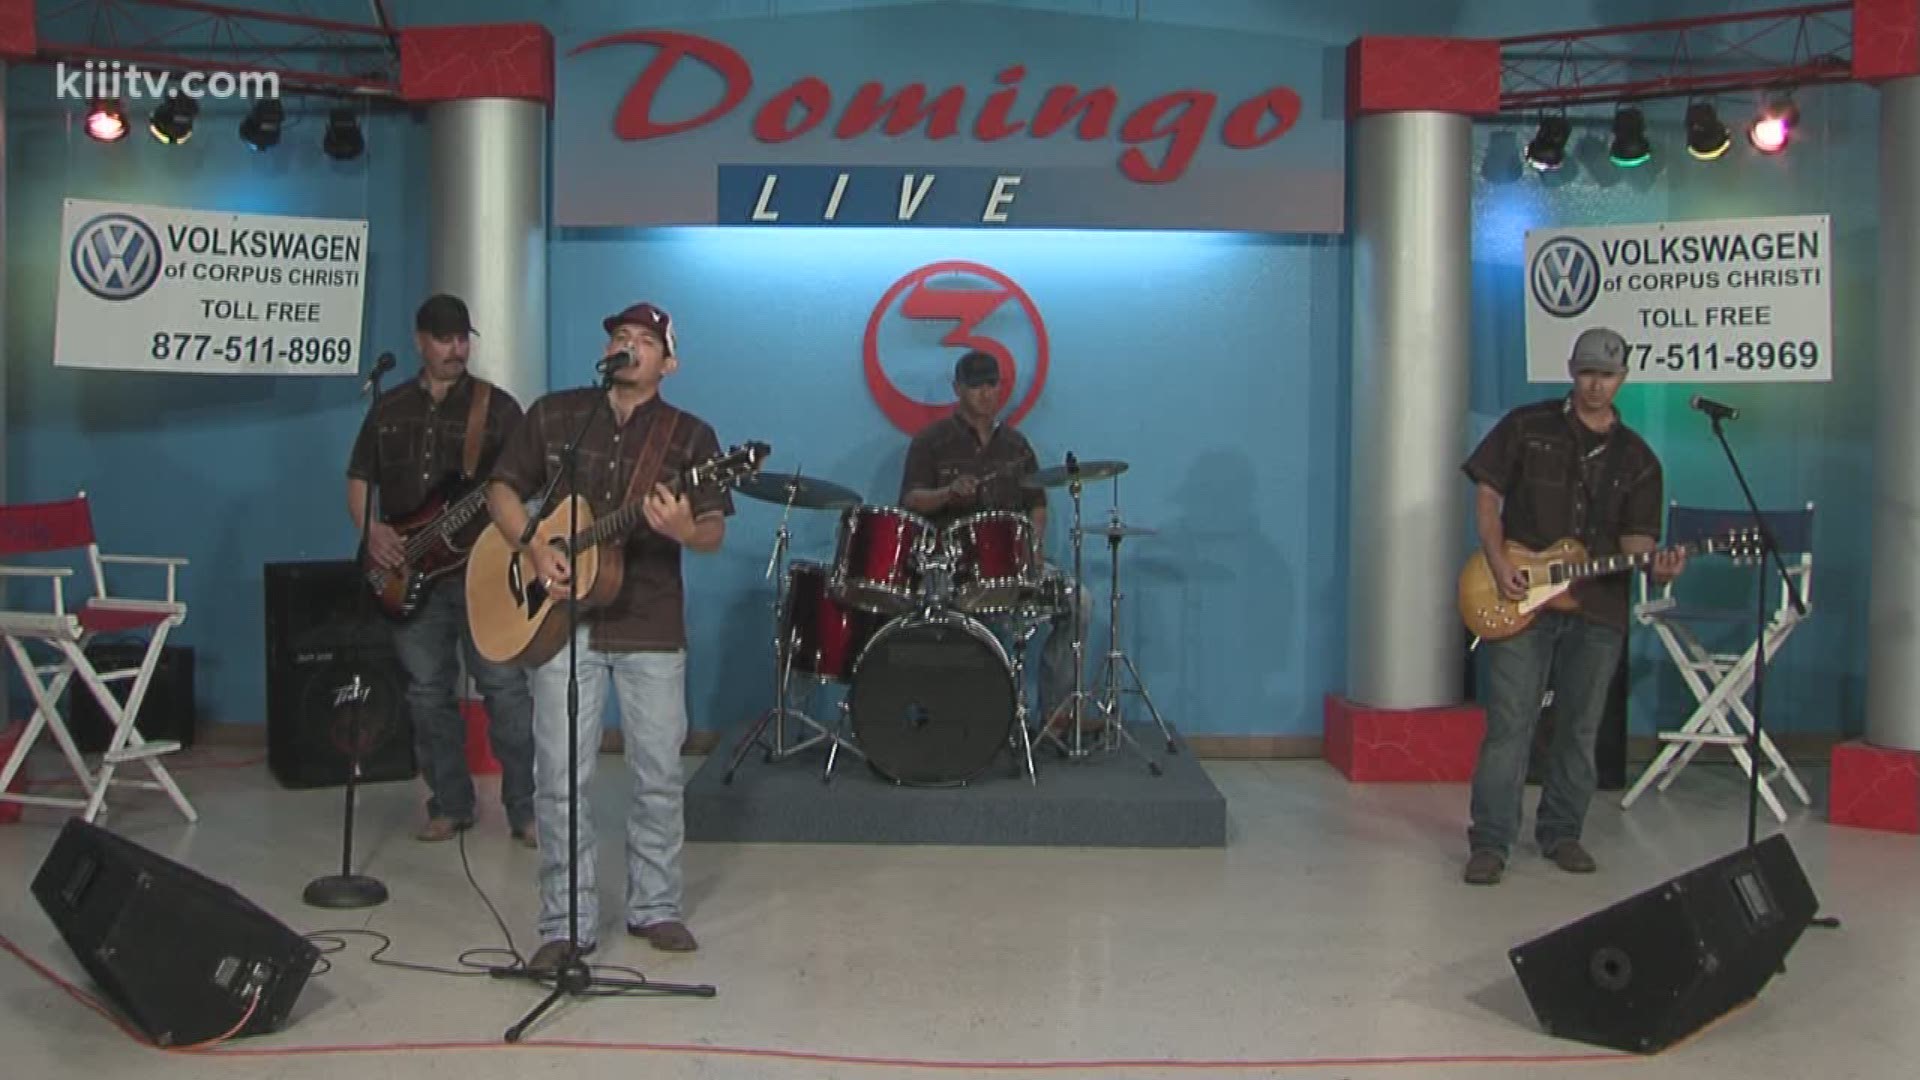 The Brush Country Band Performing "Highway 339" on Domingo Live!